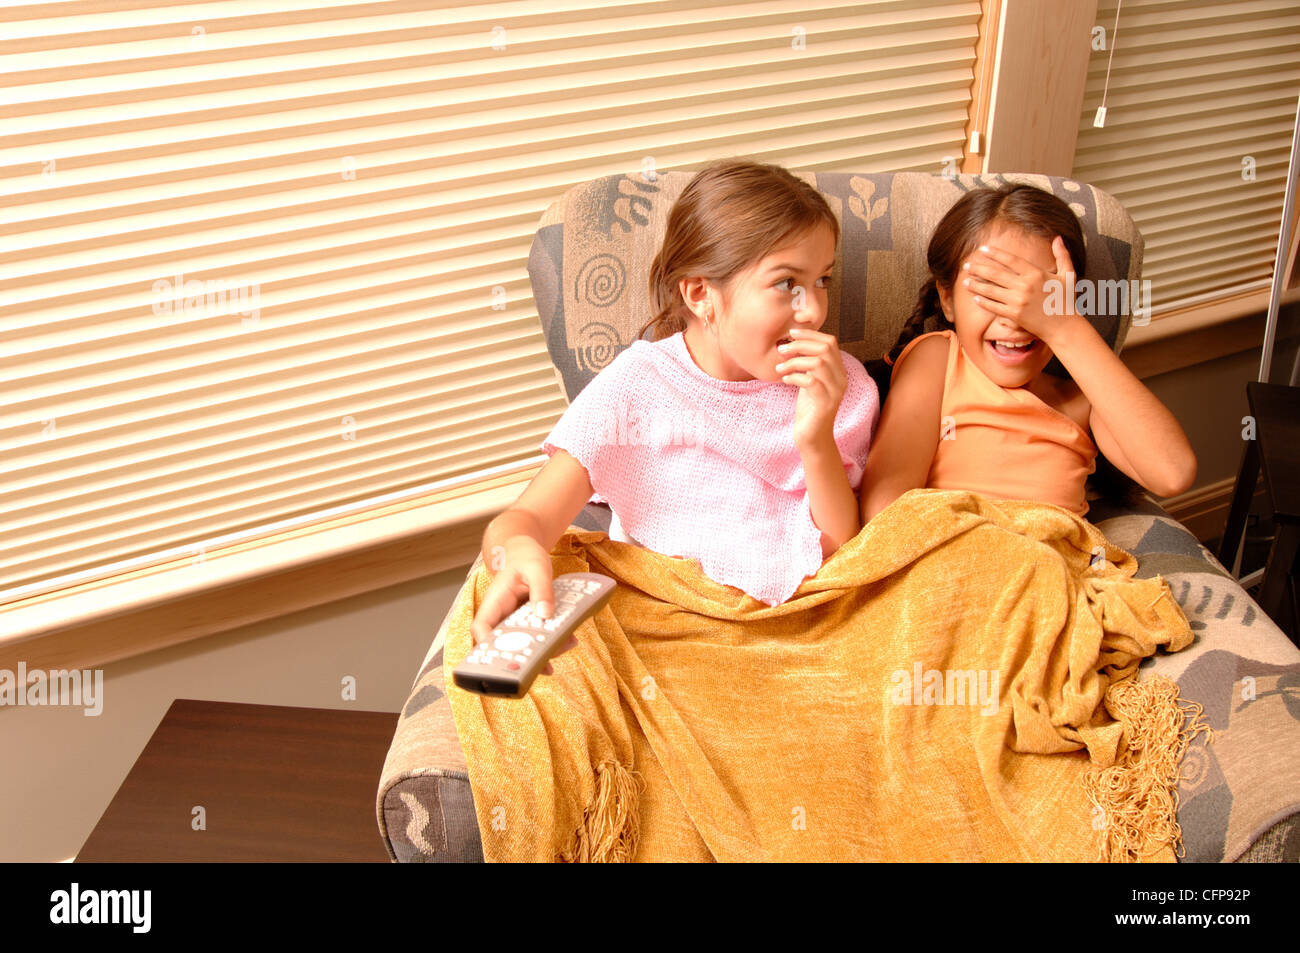 Laughing Girls Sharing Chair and Blanket Stock Photo